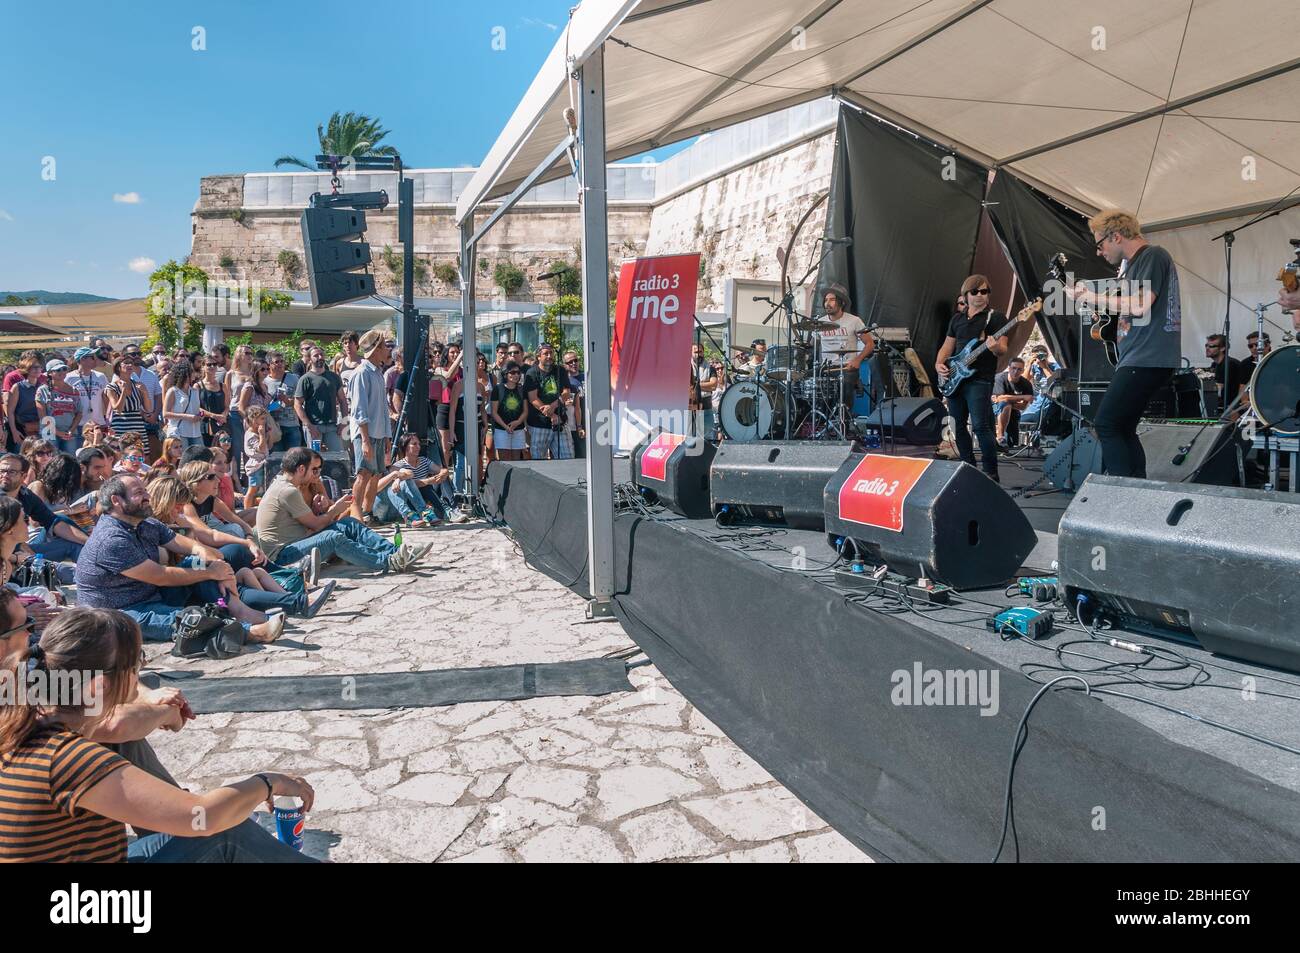 Palma de Mallorca, Spain; 10/04/2014: celebration of Music Day by Radio 3. On stage the musical group L.A. with public in the sun Stock Photo